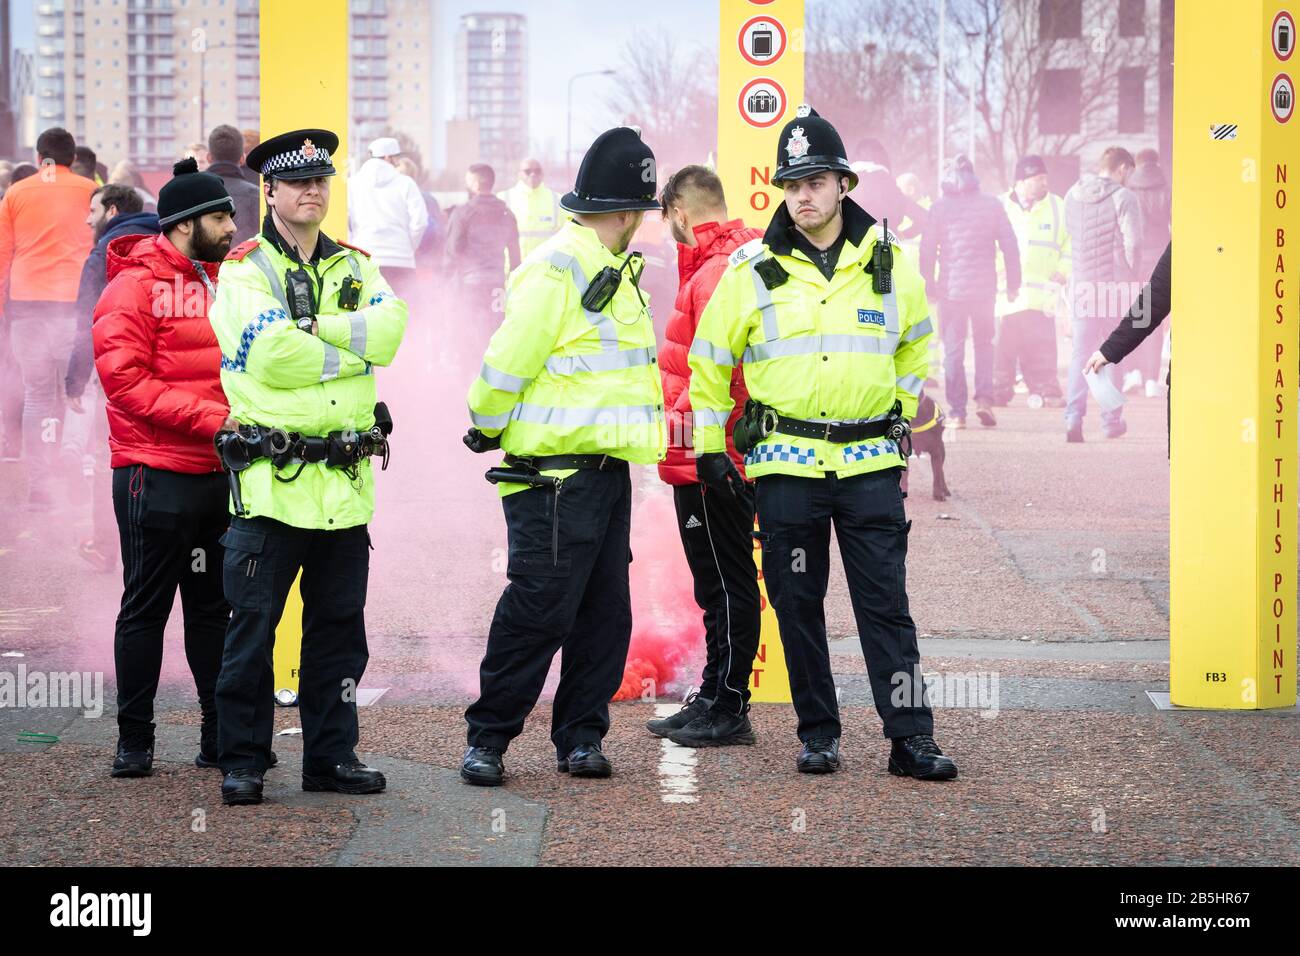 Manchester, UK. 08th Mar, 2020. The second derby of the season sees Manchester City away at Old Trafford where supporters have been gathering since early afternoon. Credit: Andy Barton/Alamy Live News Stock Photo